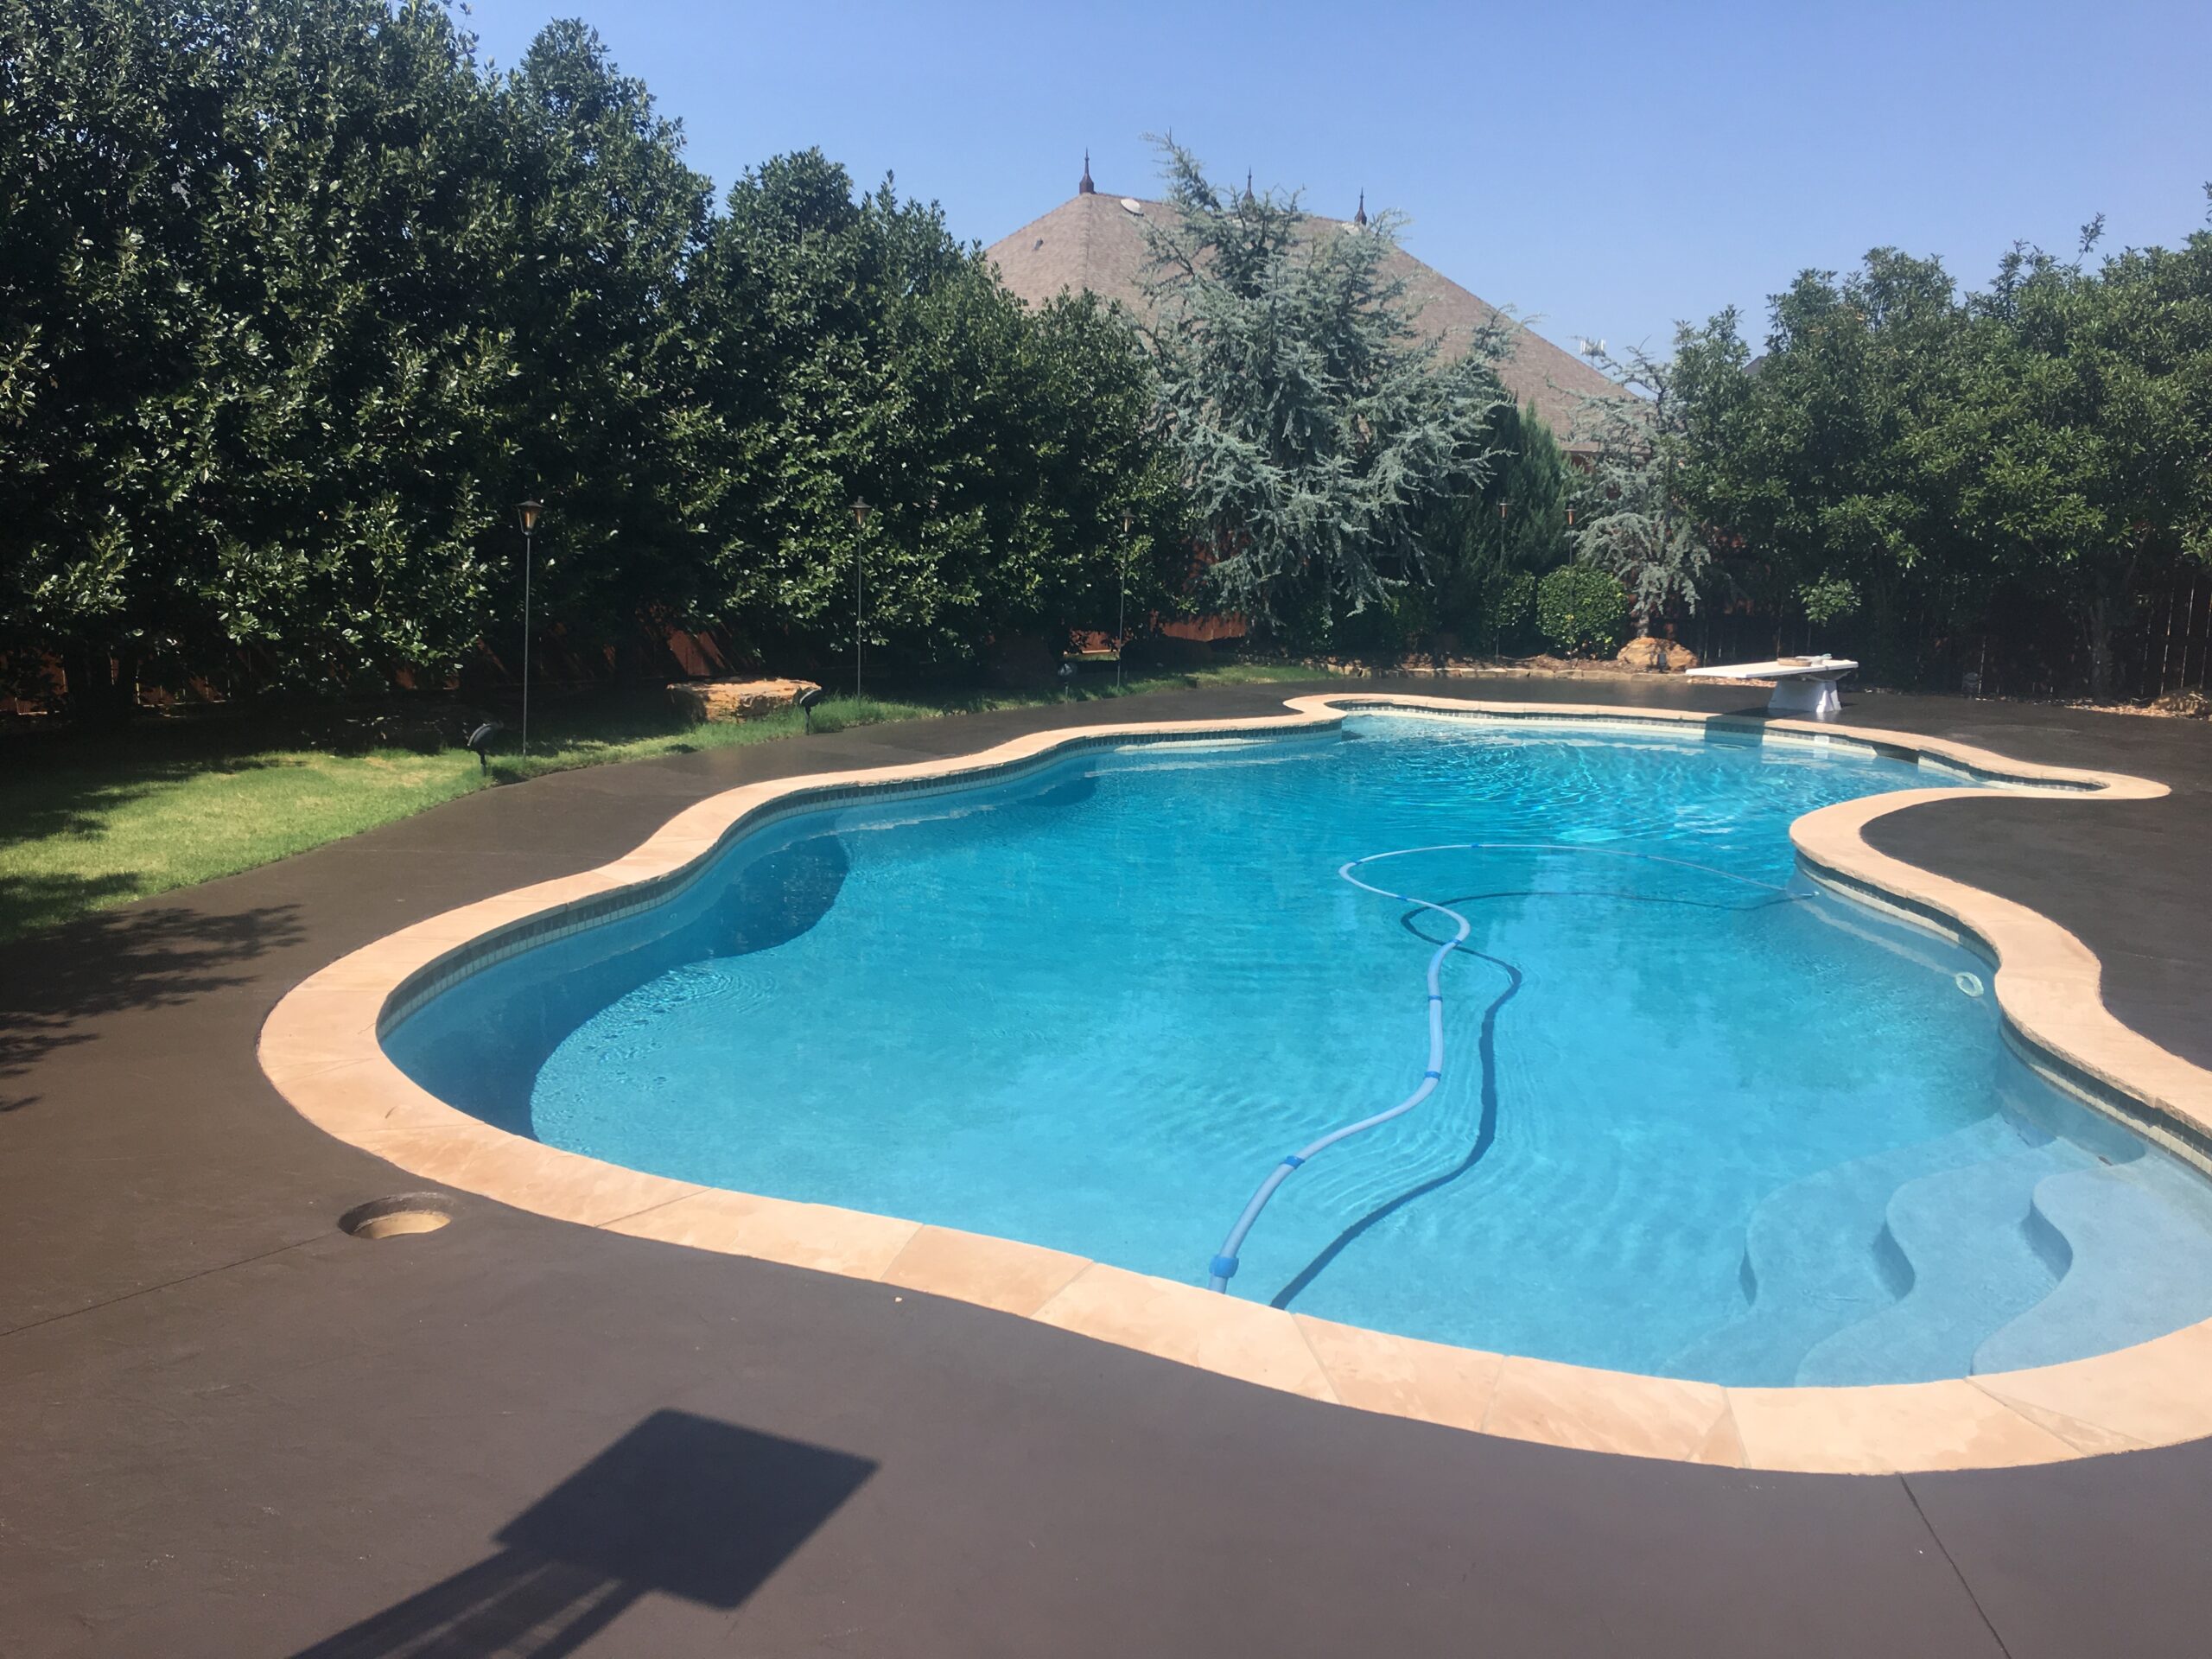 After: A stunning poolside oasis brought back to life with Resurface-It concrete overlay and Chocolate EasyTint